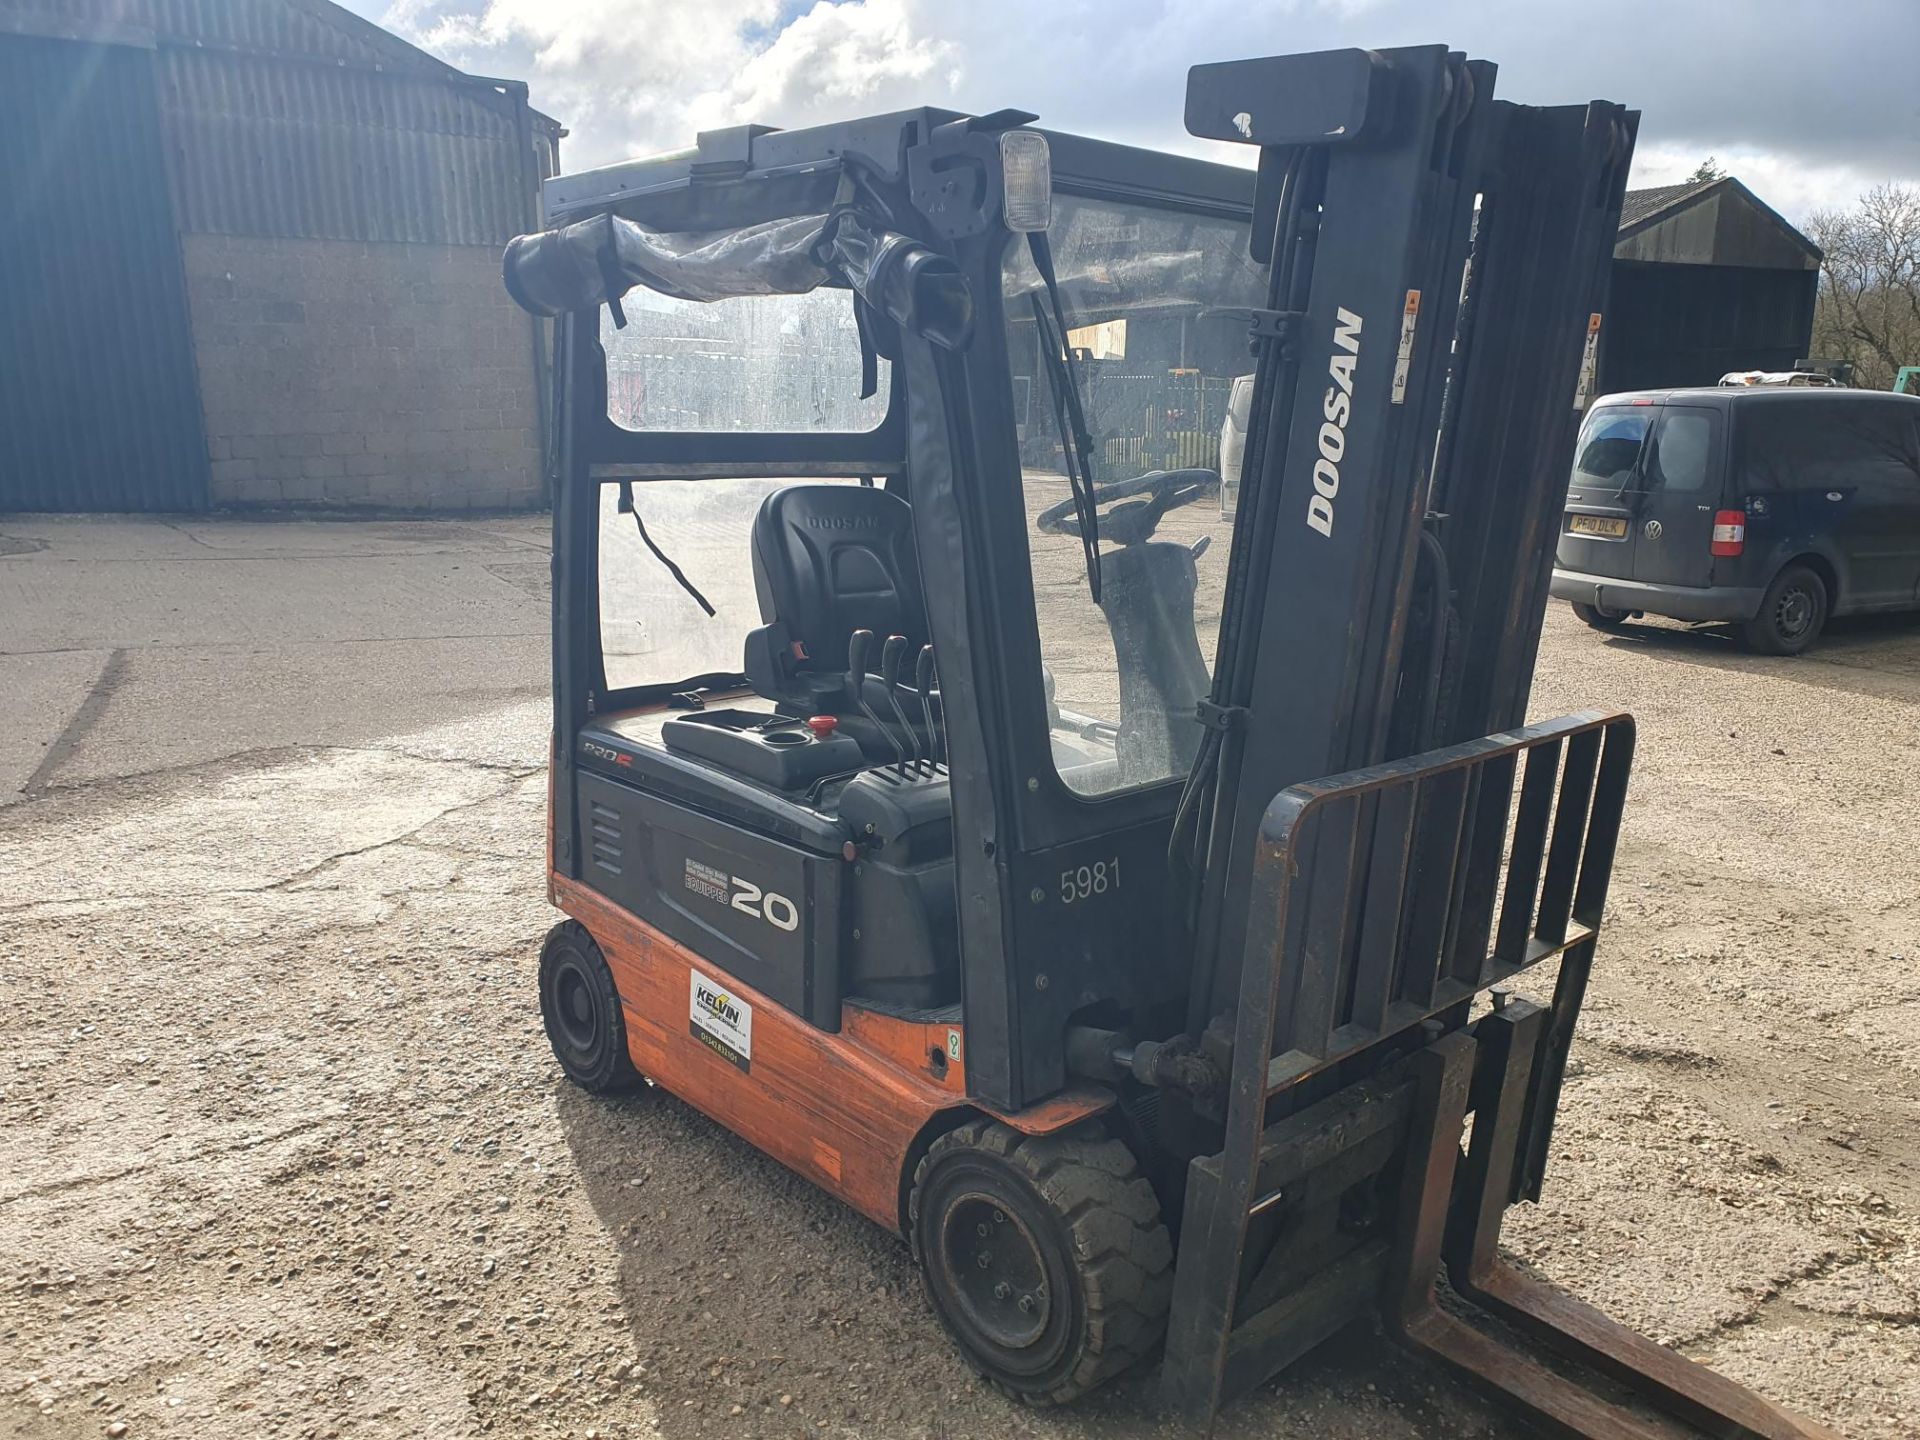 DAEWOO/DOOSAN ELECTRIC 2 TON FORKLIFT WITH FULL CAB - Image 4 of 8